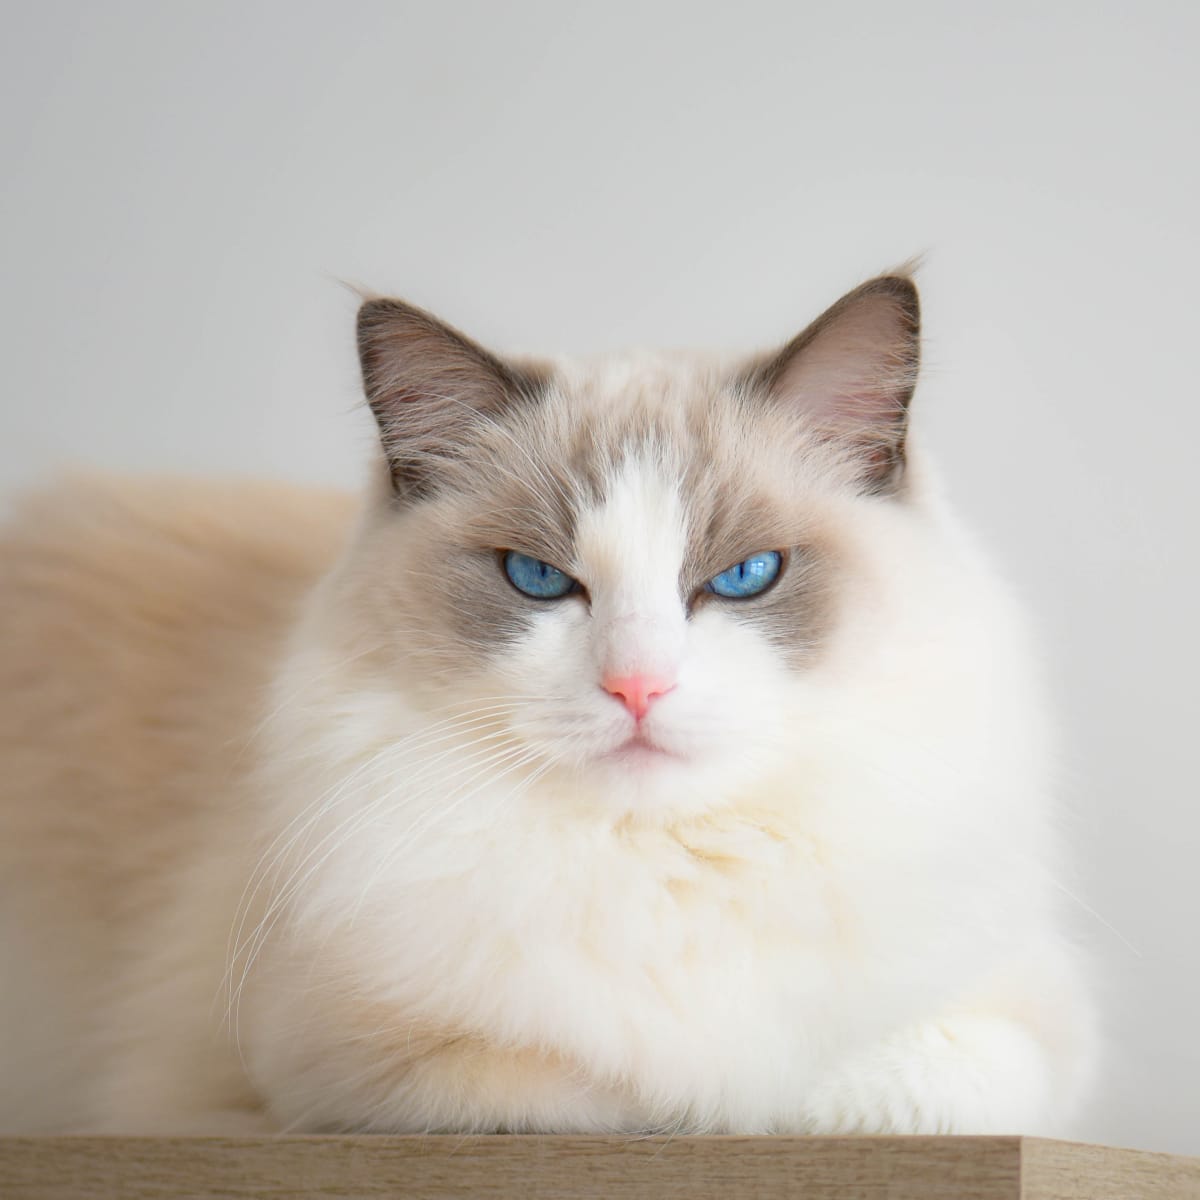 I. Introduction to Ragdoll Cats